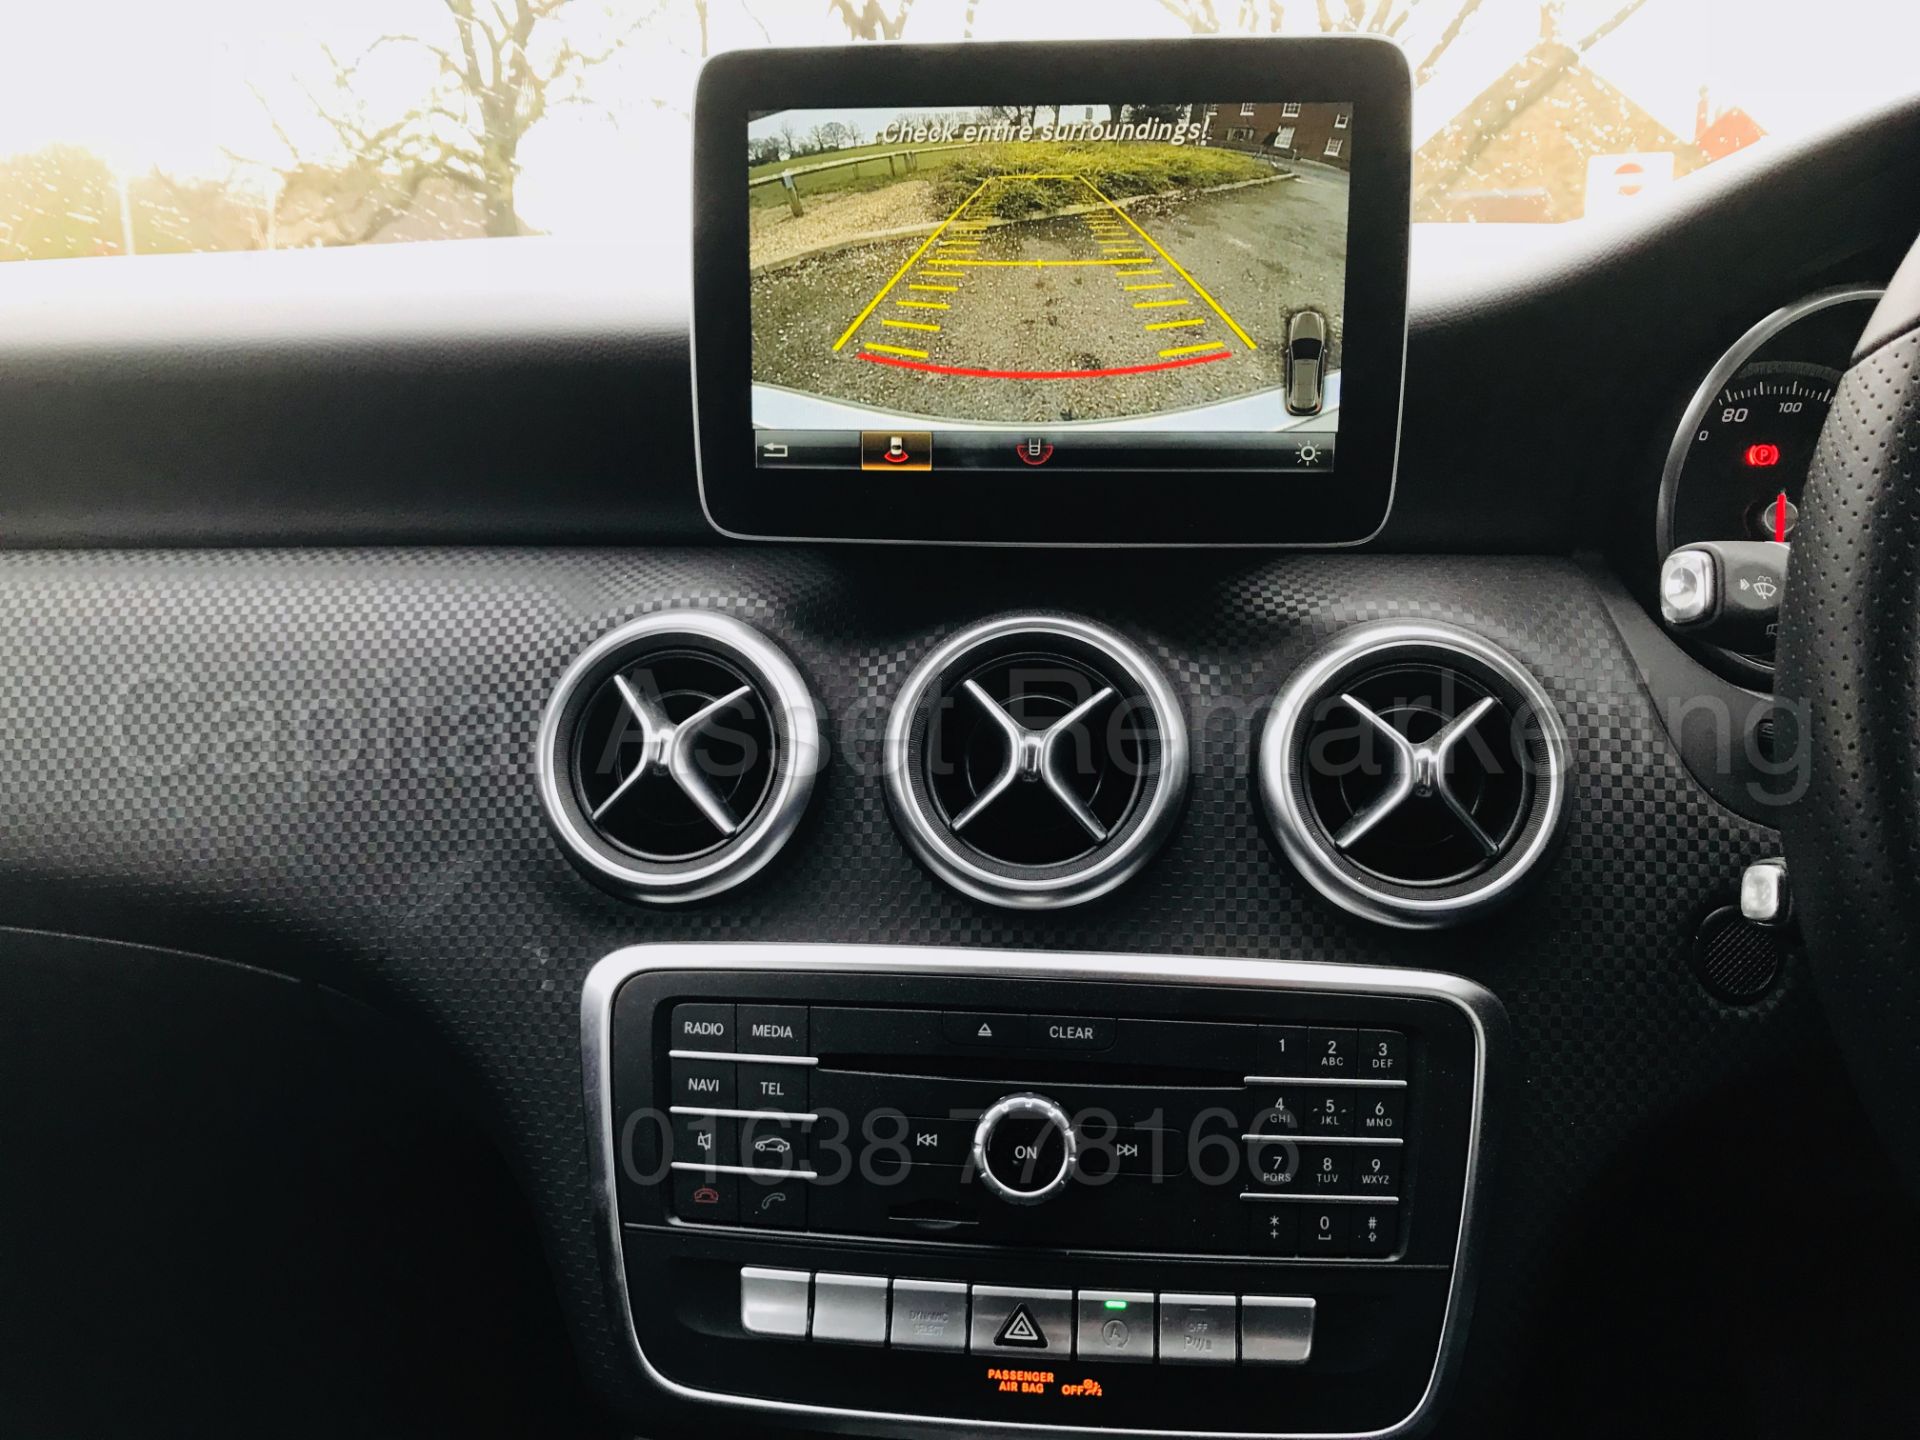 MERCEDES-BENZ A180D 'SPORT' (2017 MODEL) '7G TRONIC AUTO - LEATHER - SAT NAV' (1 OWNER FROM NEW) - Image 33 of 41